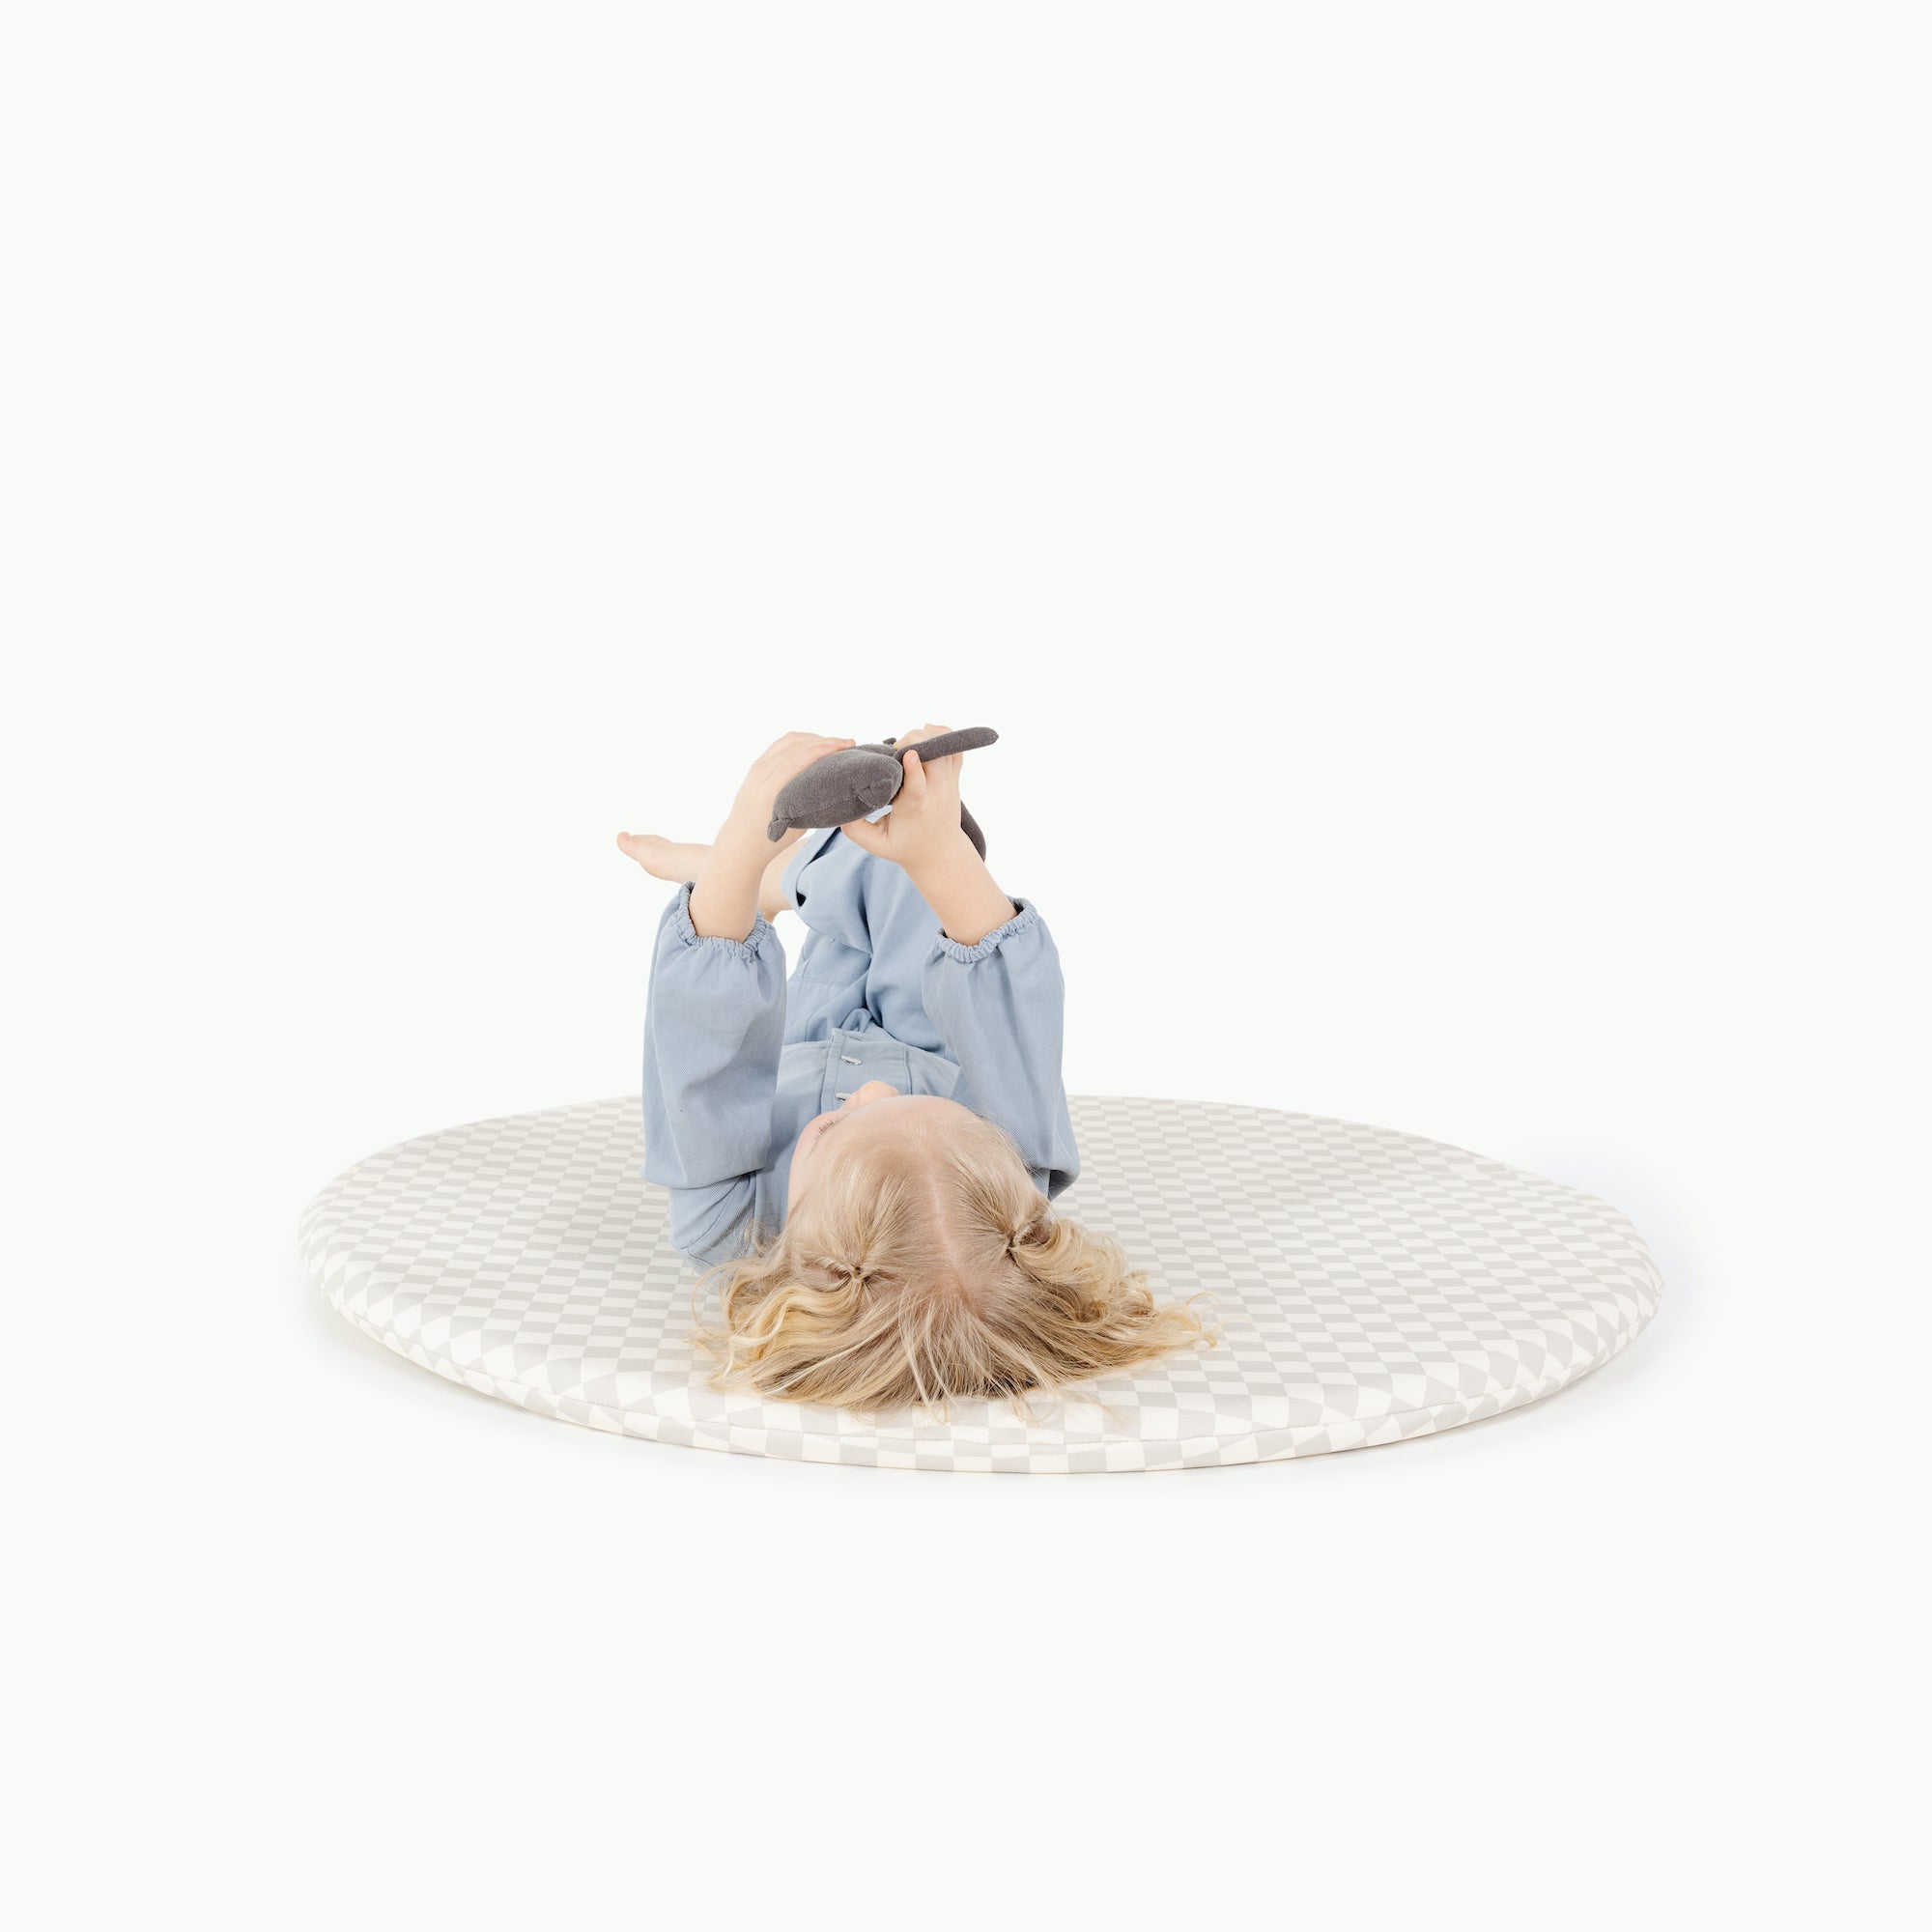 Rook / Circle@little girl playing on padded mat